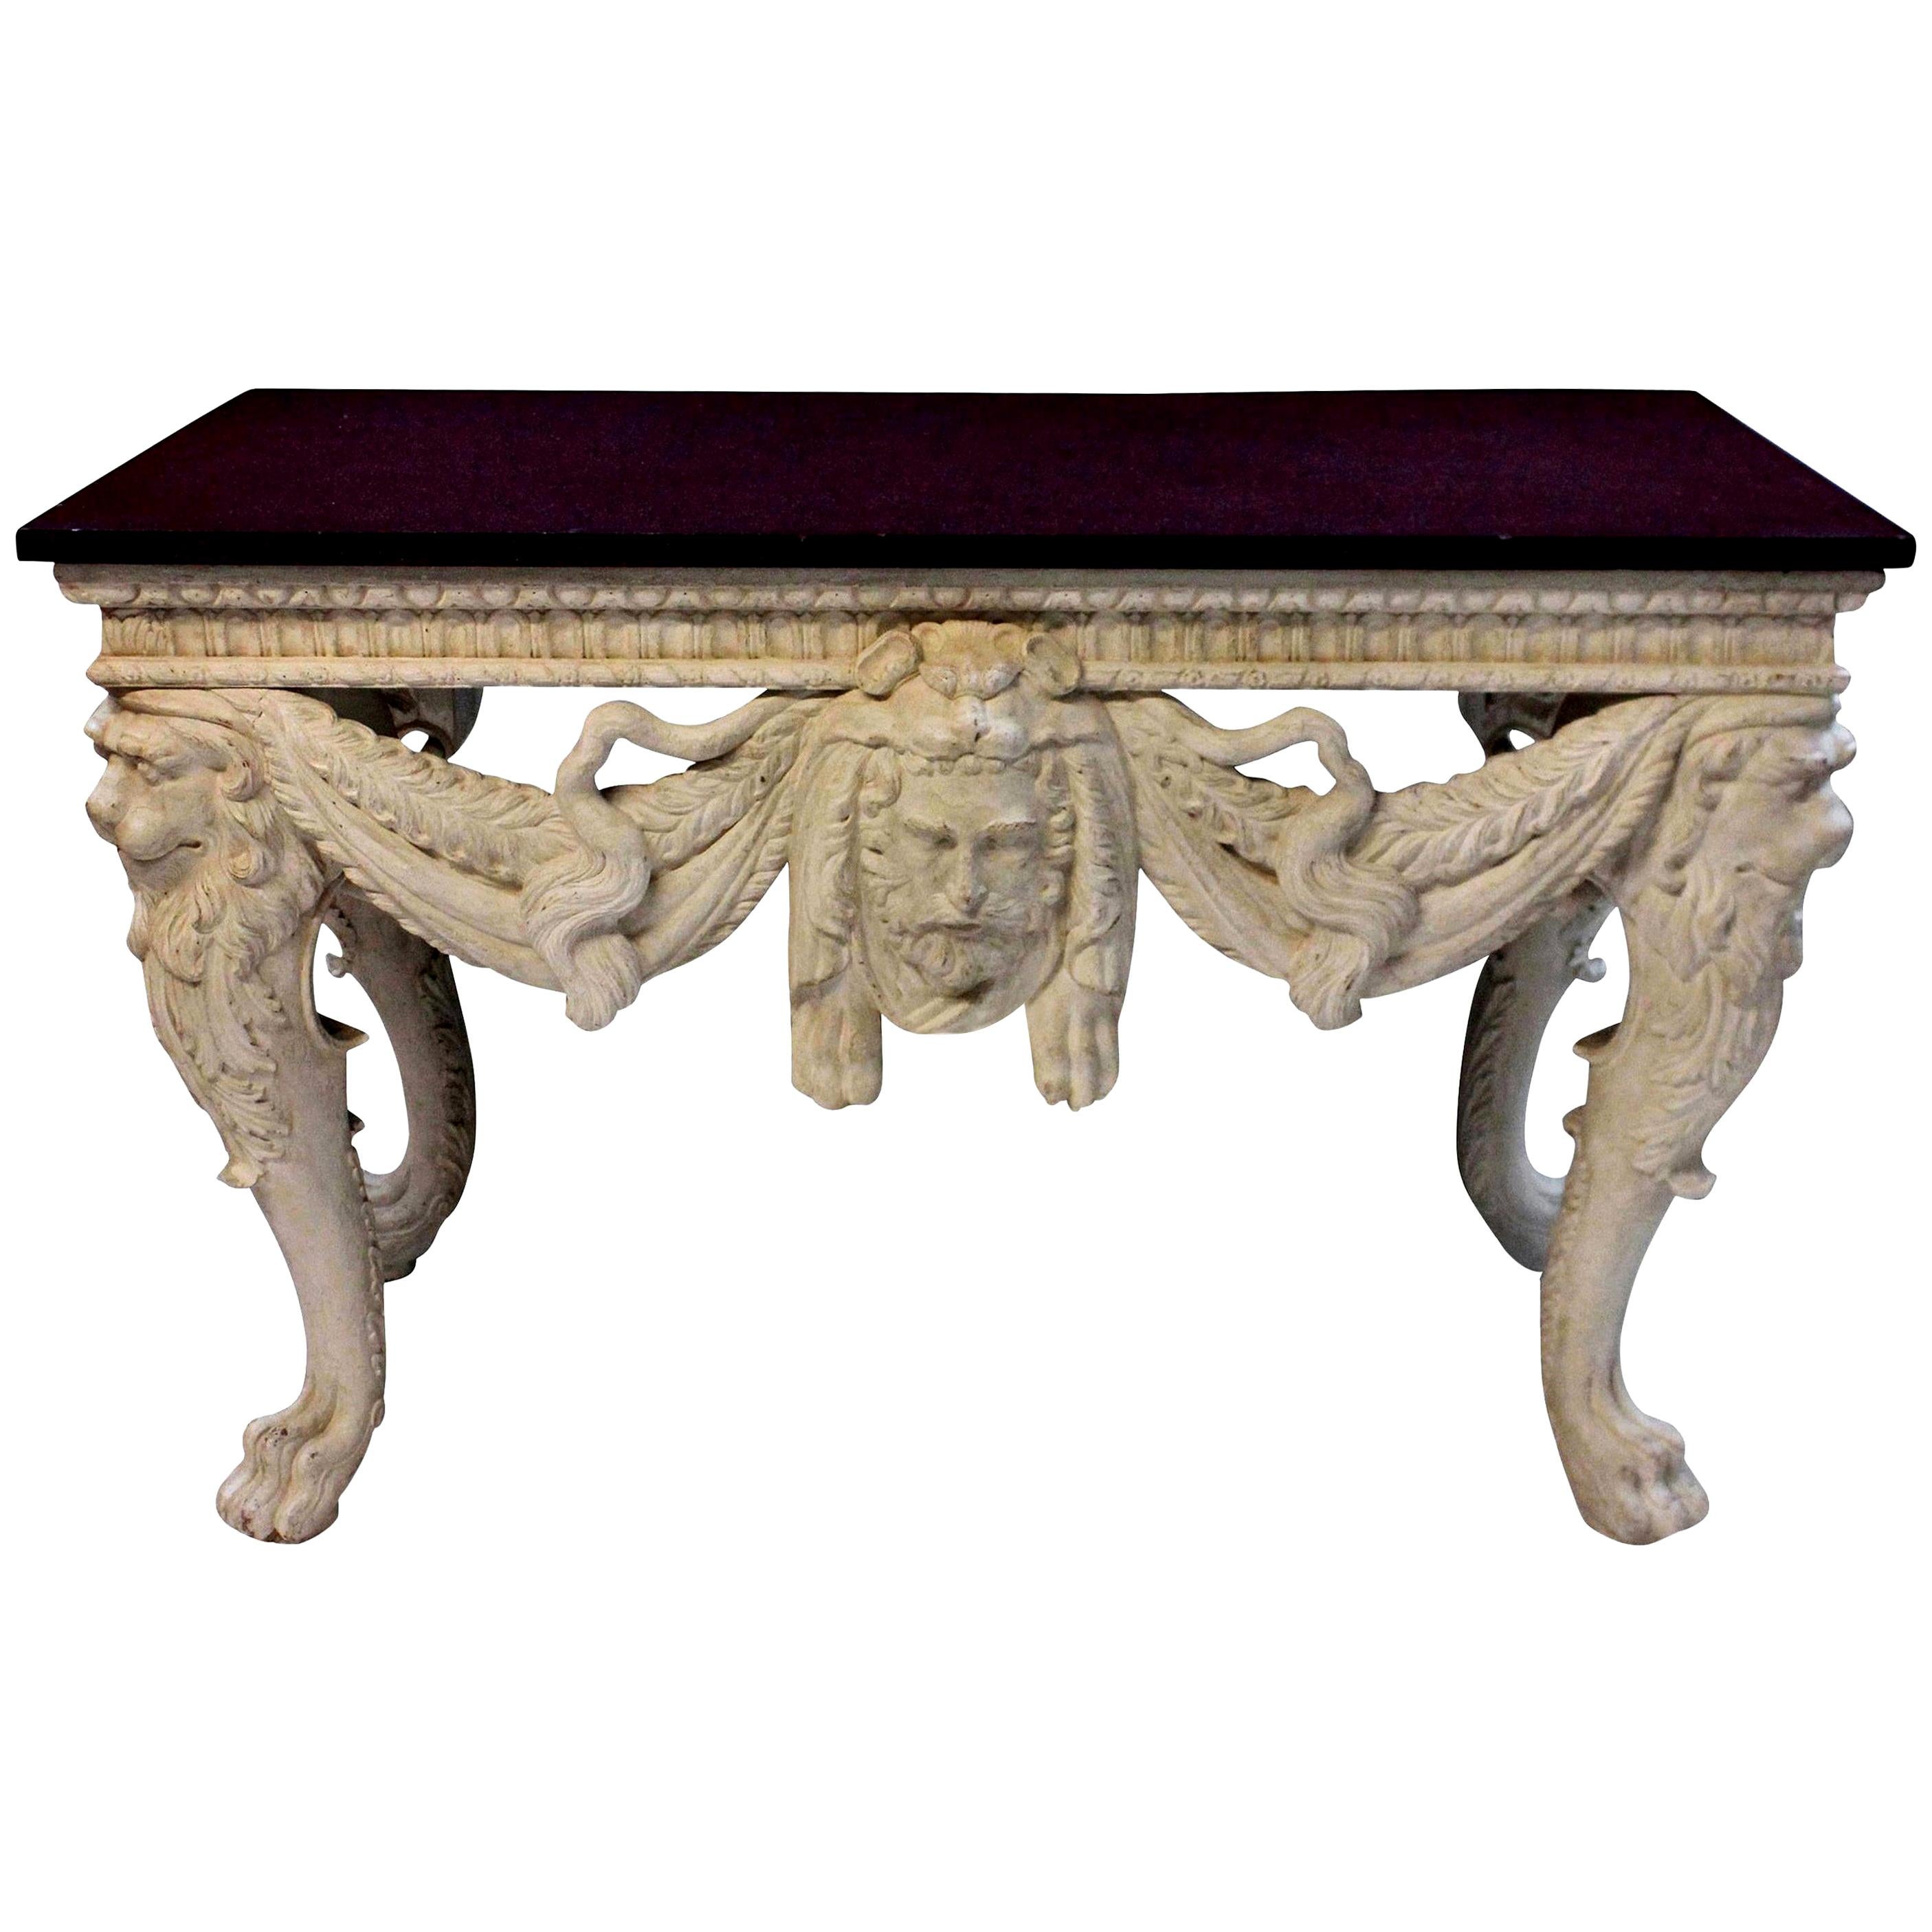 Exceptional Painted Mahogany Console Table with a Porphyry Top